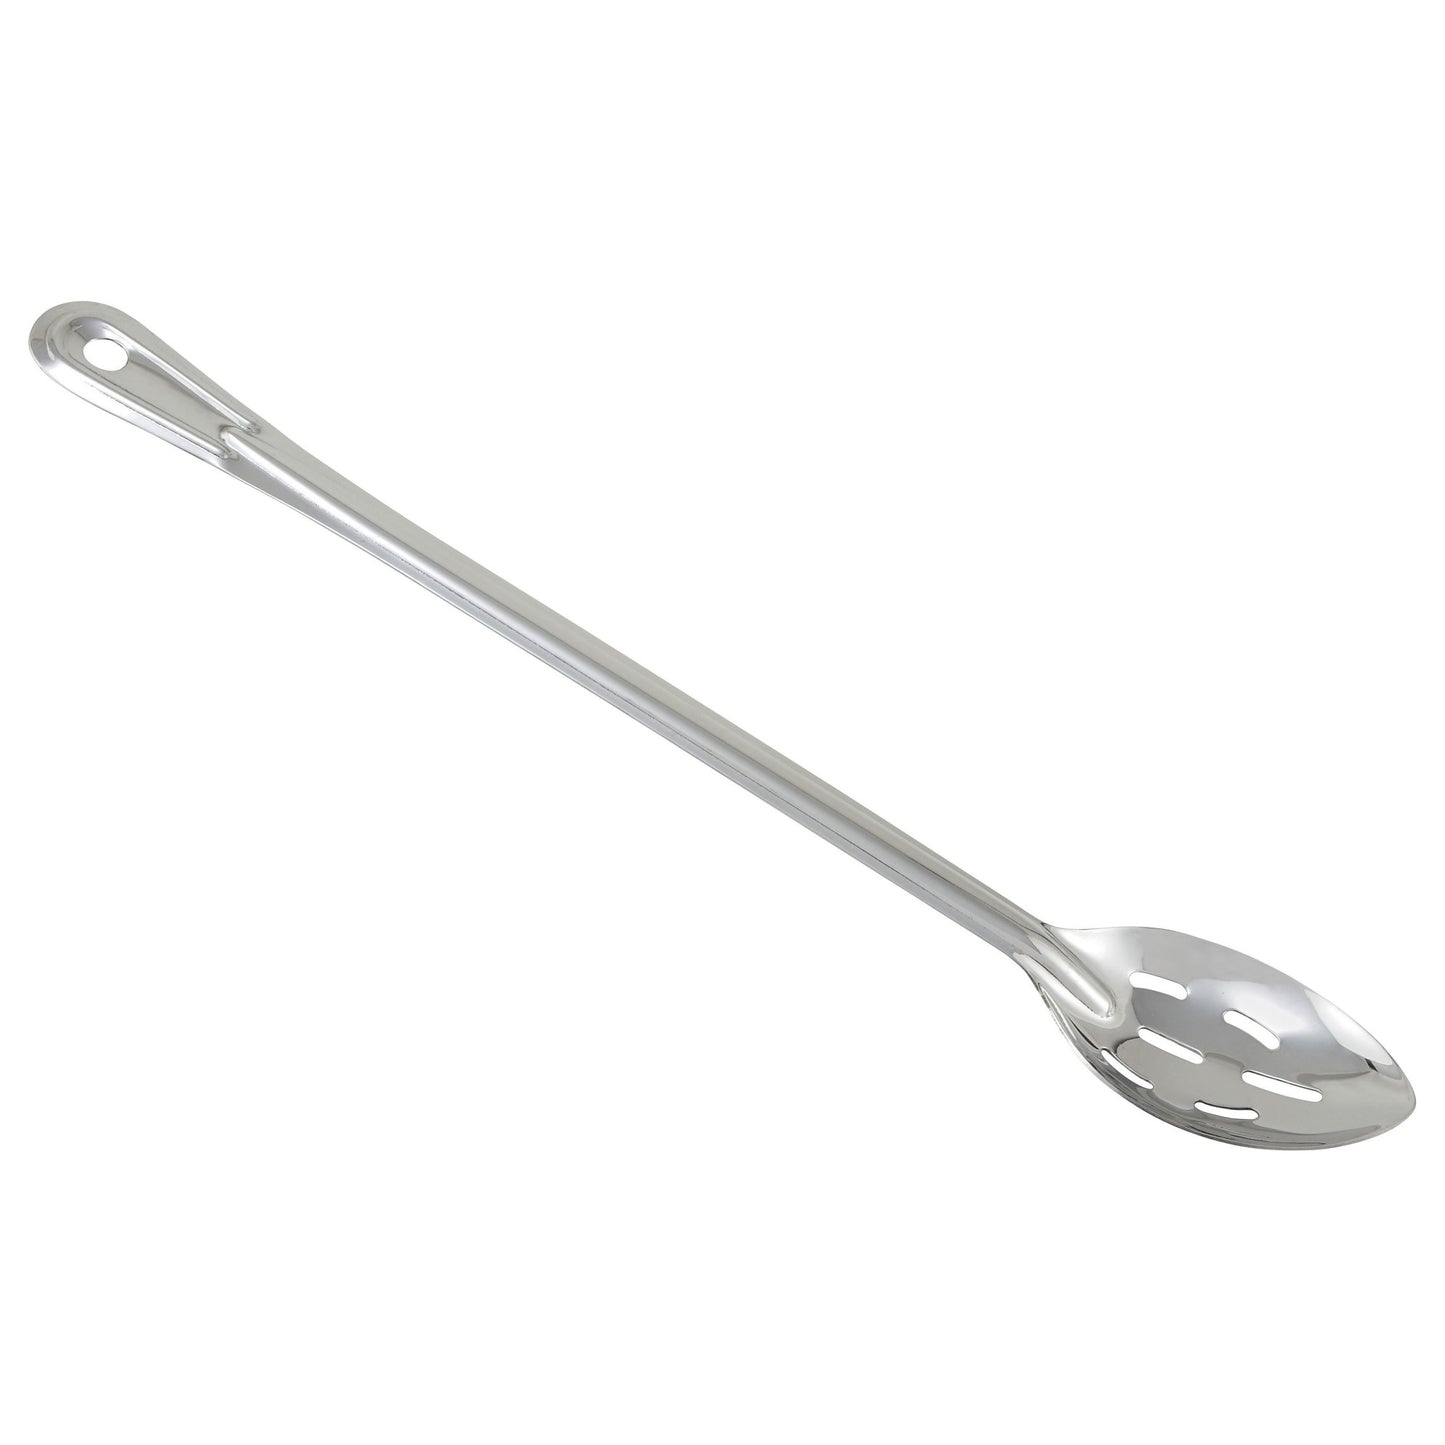 BSSN-18 - Winco Prime One-piece Stainless Steel Basting Spoon, NSF - Slotted, 18"